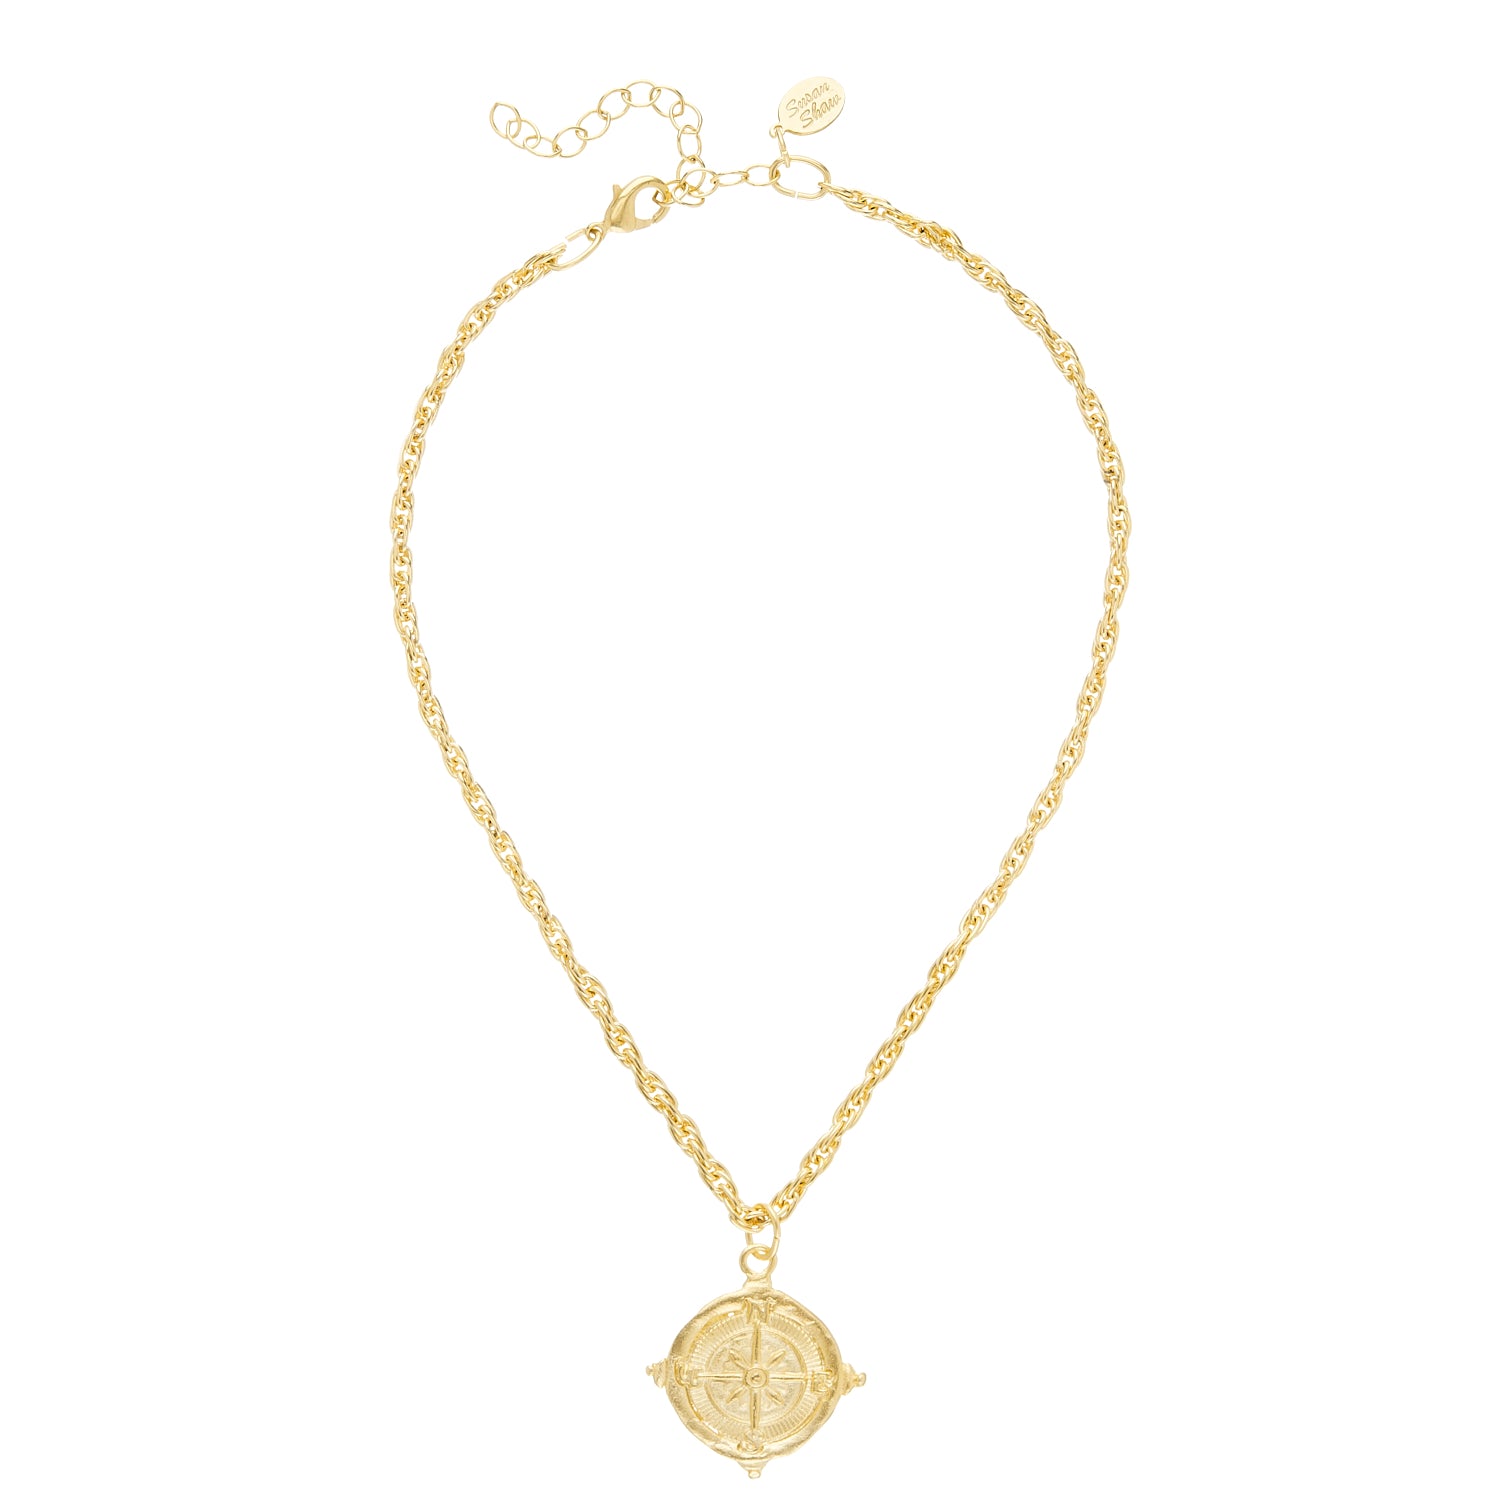 Get ready to lose yourself in the charm of the Gold Compass Necklace by Susan Shaw. With its triple plated 24k gold and a versatile length of 16" with a 3" extender, this necklace will guide you towards stylish adventures!